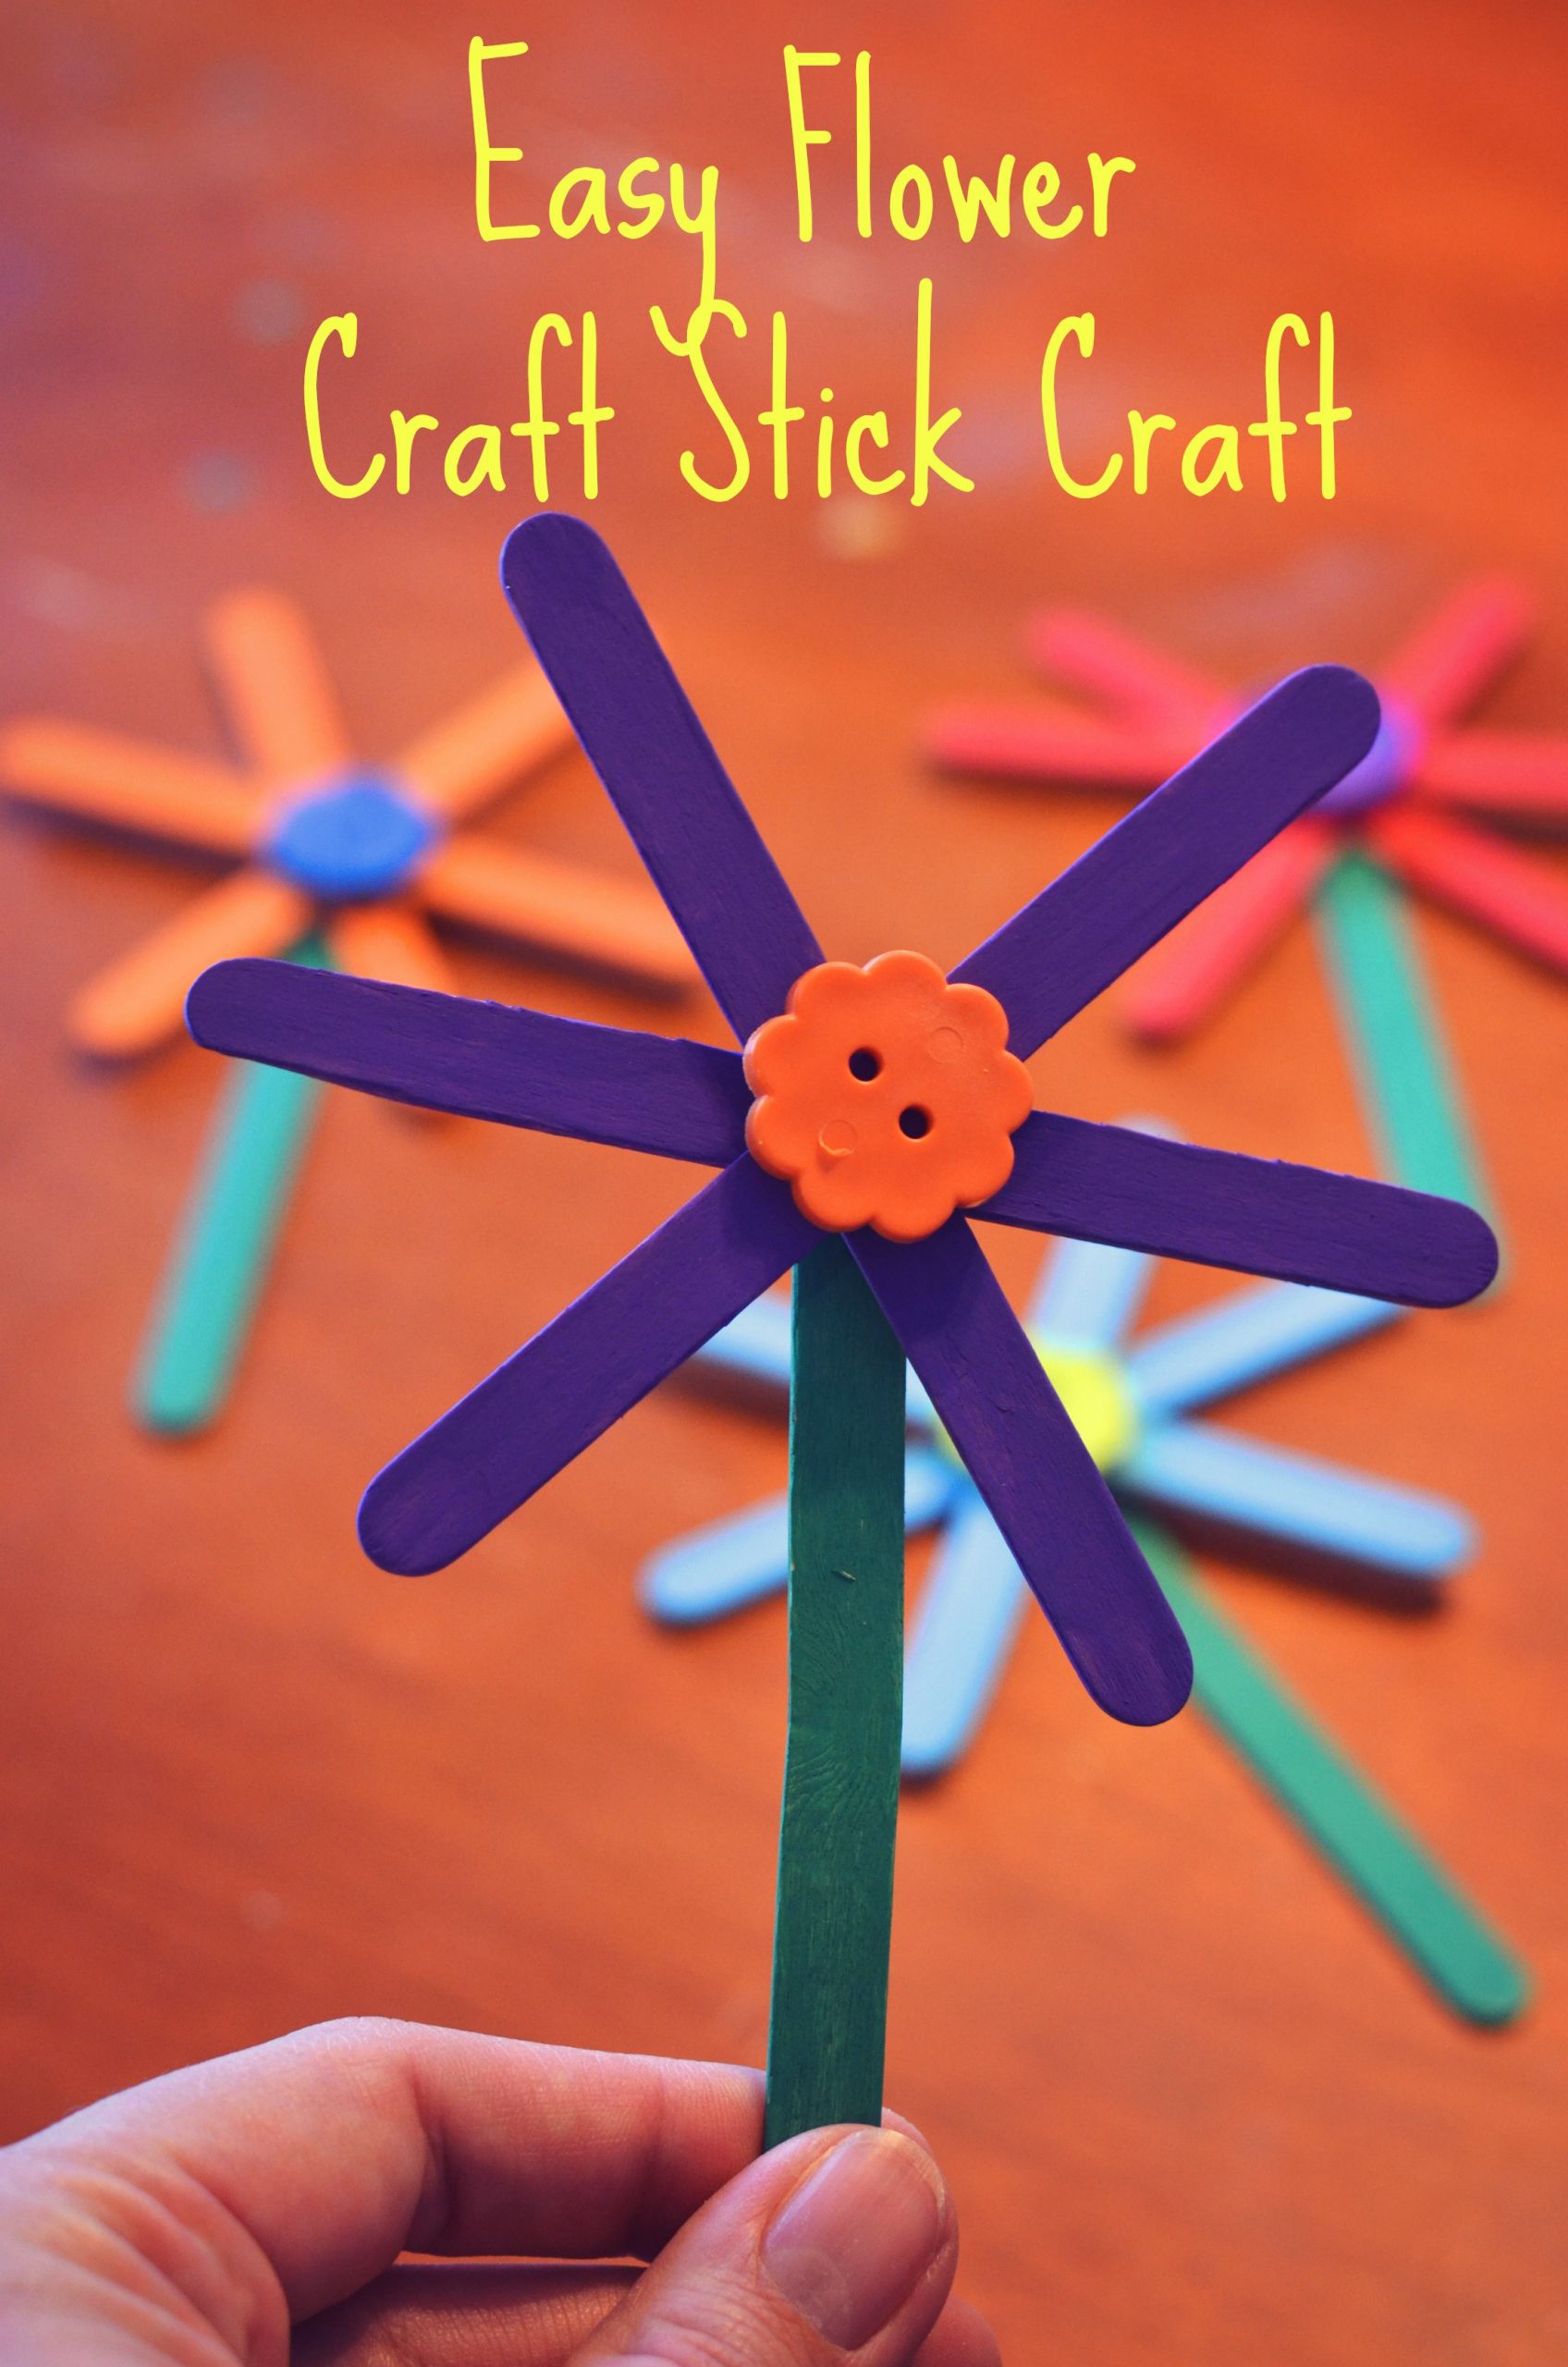 Craft Project For Toddler
 Easy Flower Craft Stick Craft for Kids